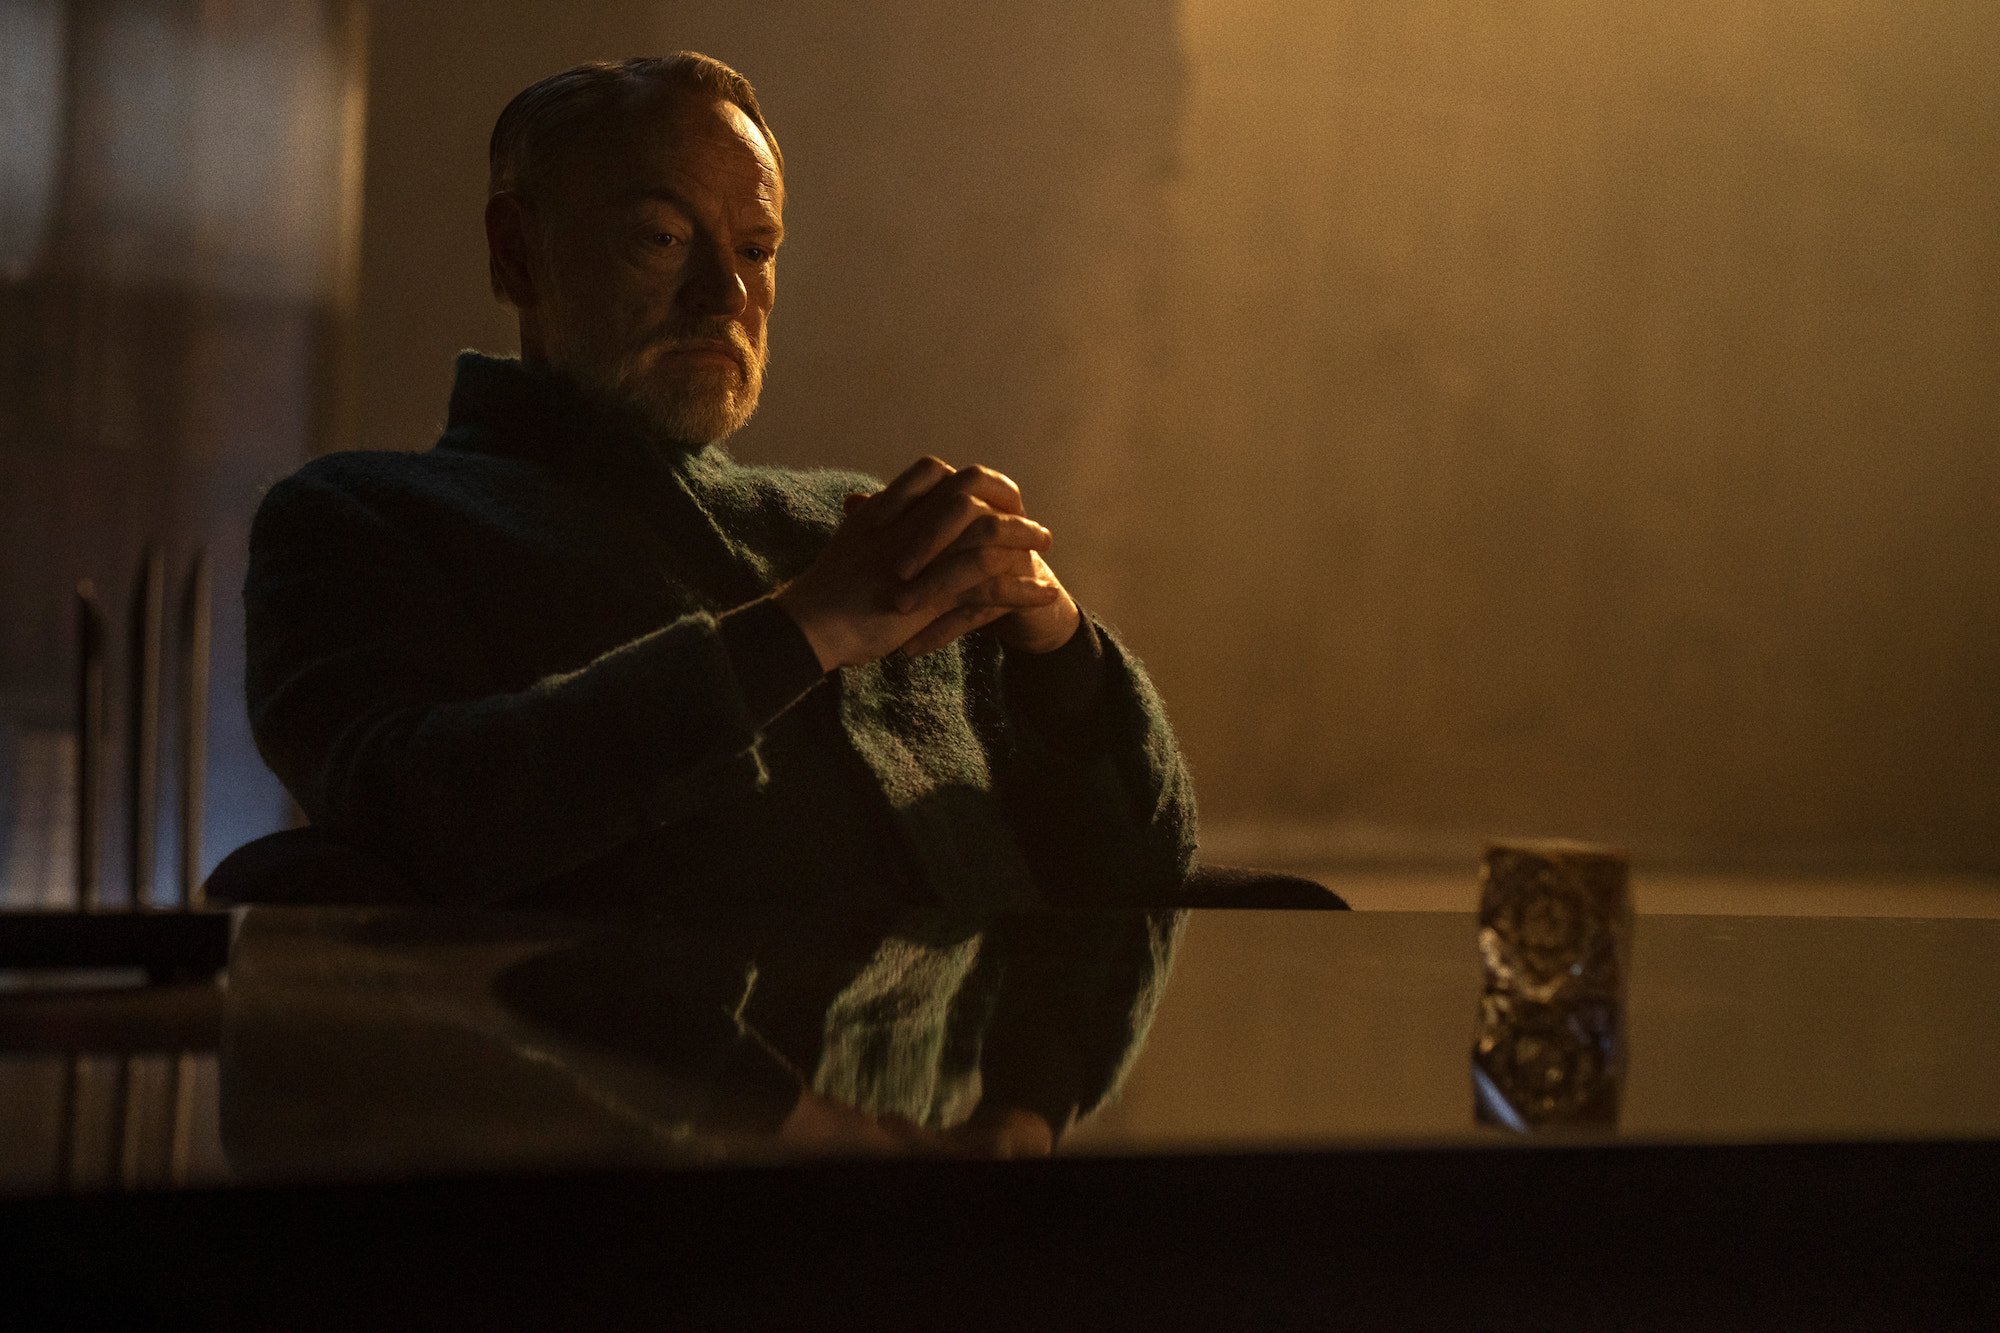 Foundation star Jared Harris sits with his hands folded on a table